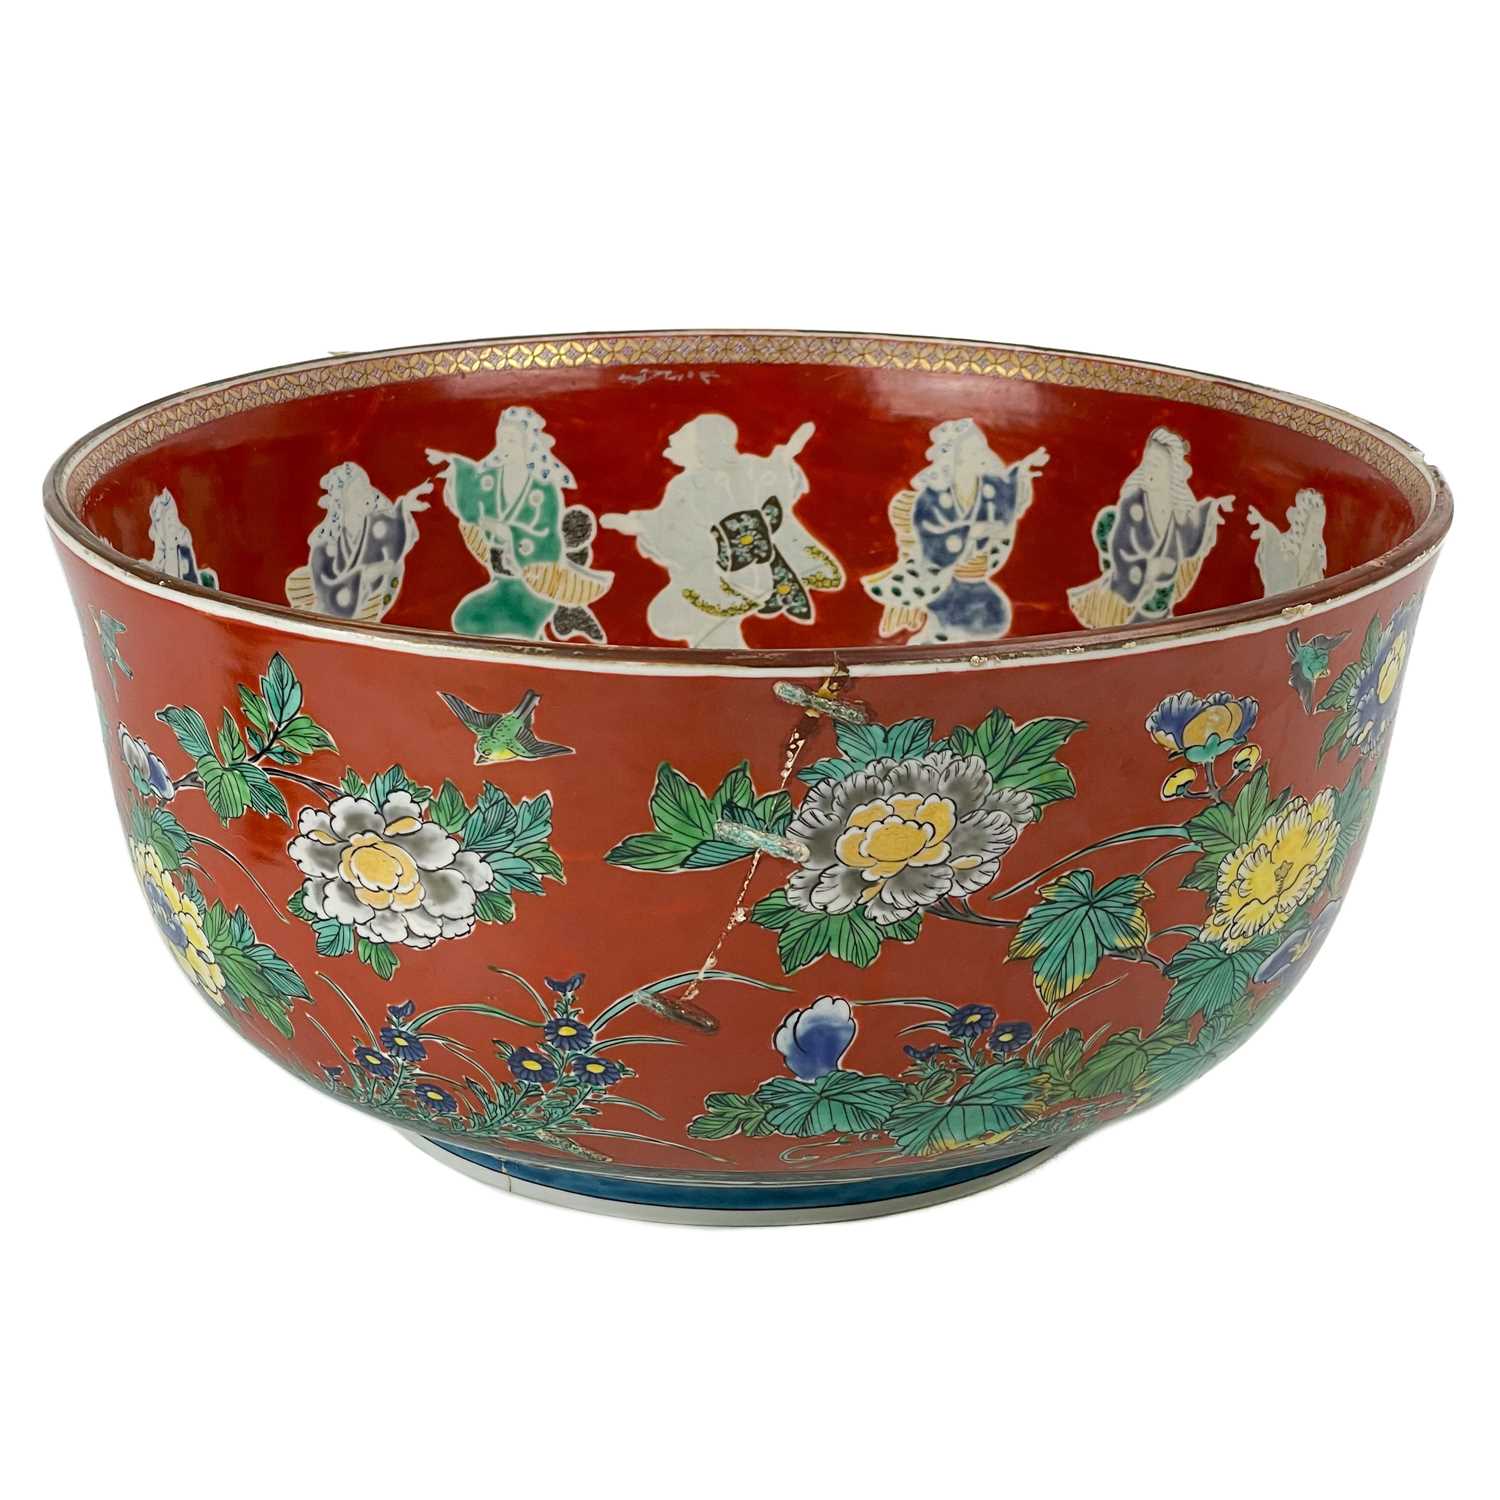 A Japanese porcelain punch bowl, late 19th century, - Image 4 of 4